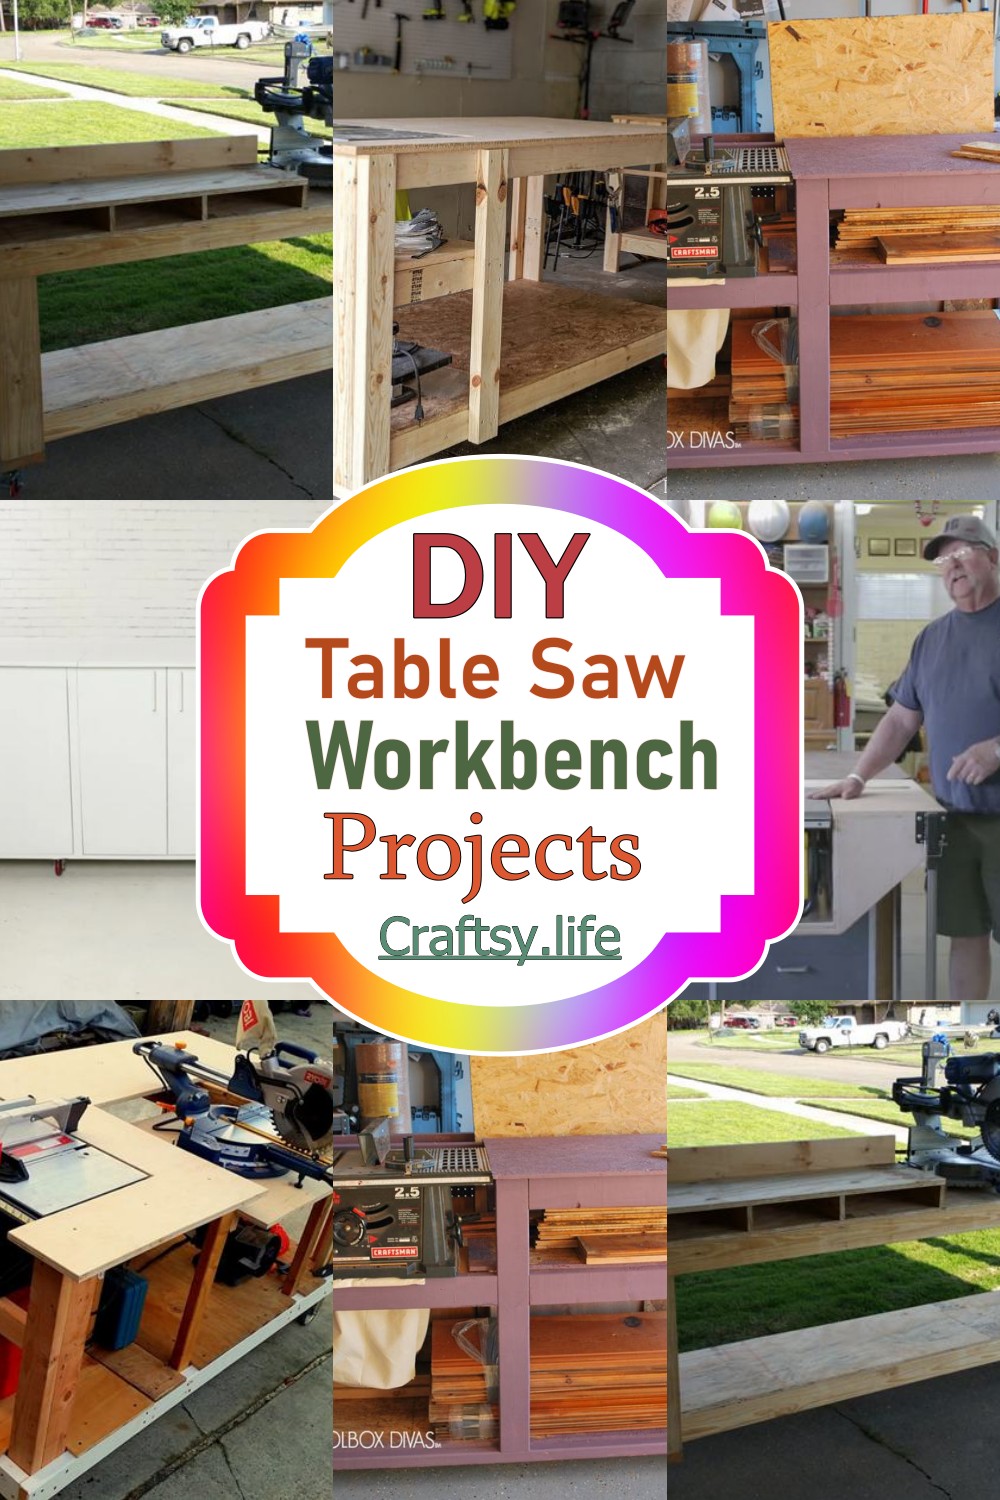 Table Saw Workbench Projects